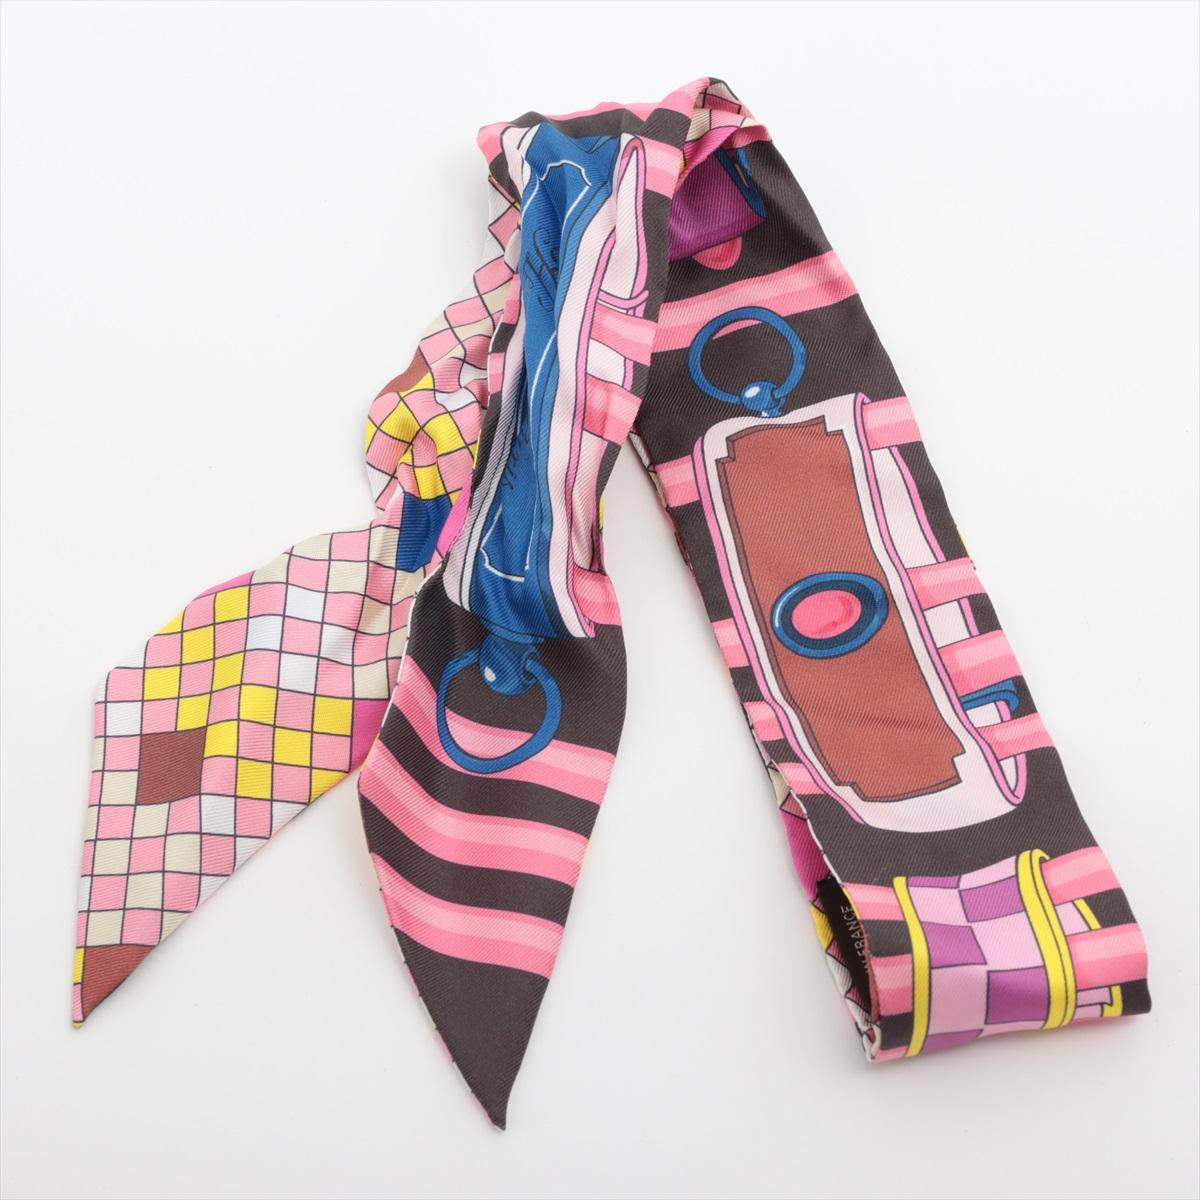 The Hermès Twilly Colliers de Chiens Remix in Pink is a vibrant and playful accessory that adds a touch of whimsy to any ensemble. Crafted from luxurious silk twill, the Twilly scarf features a striking design inspired by Hermès' iconic Colliers de